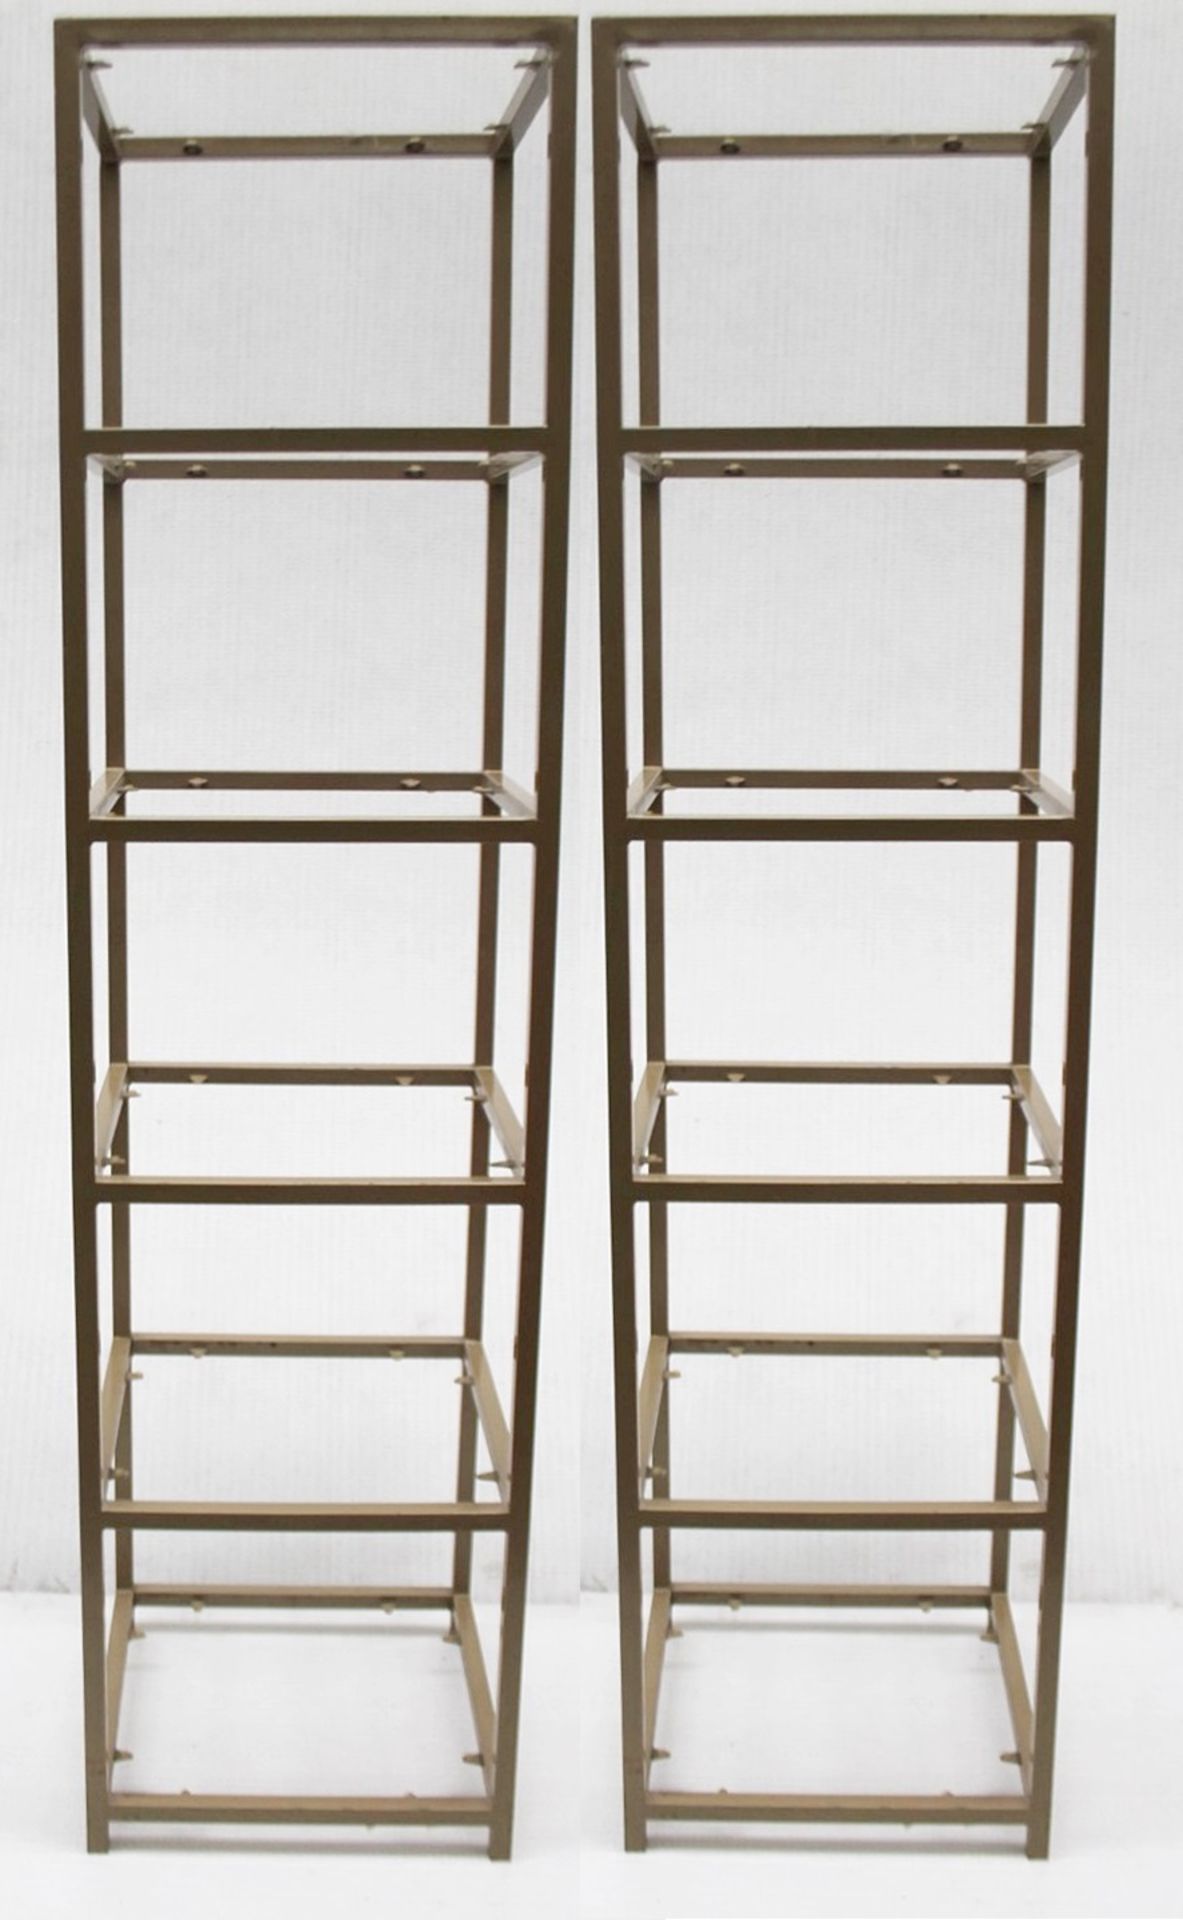 2 x Commercial 2-Metre Tall 5-Tier Shelving Unit In White And Bronze Finish (No Boards) - Ex-Display